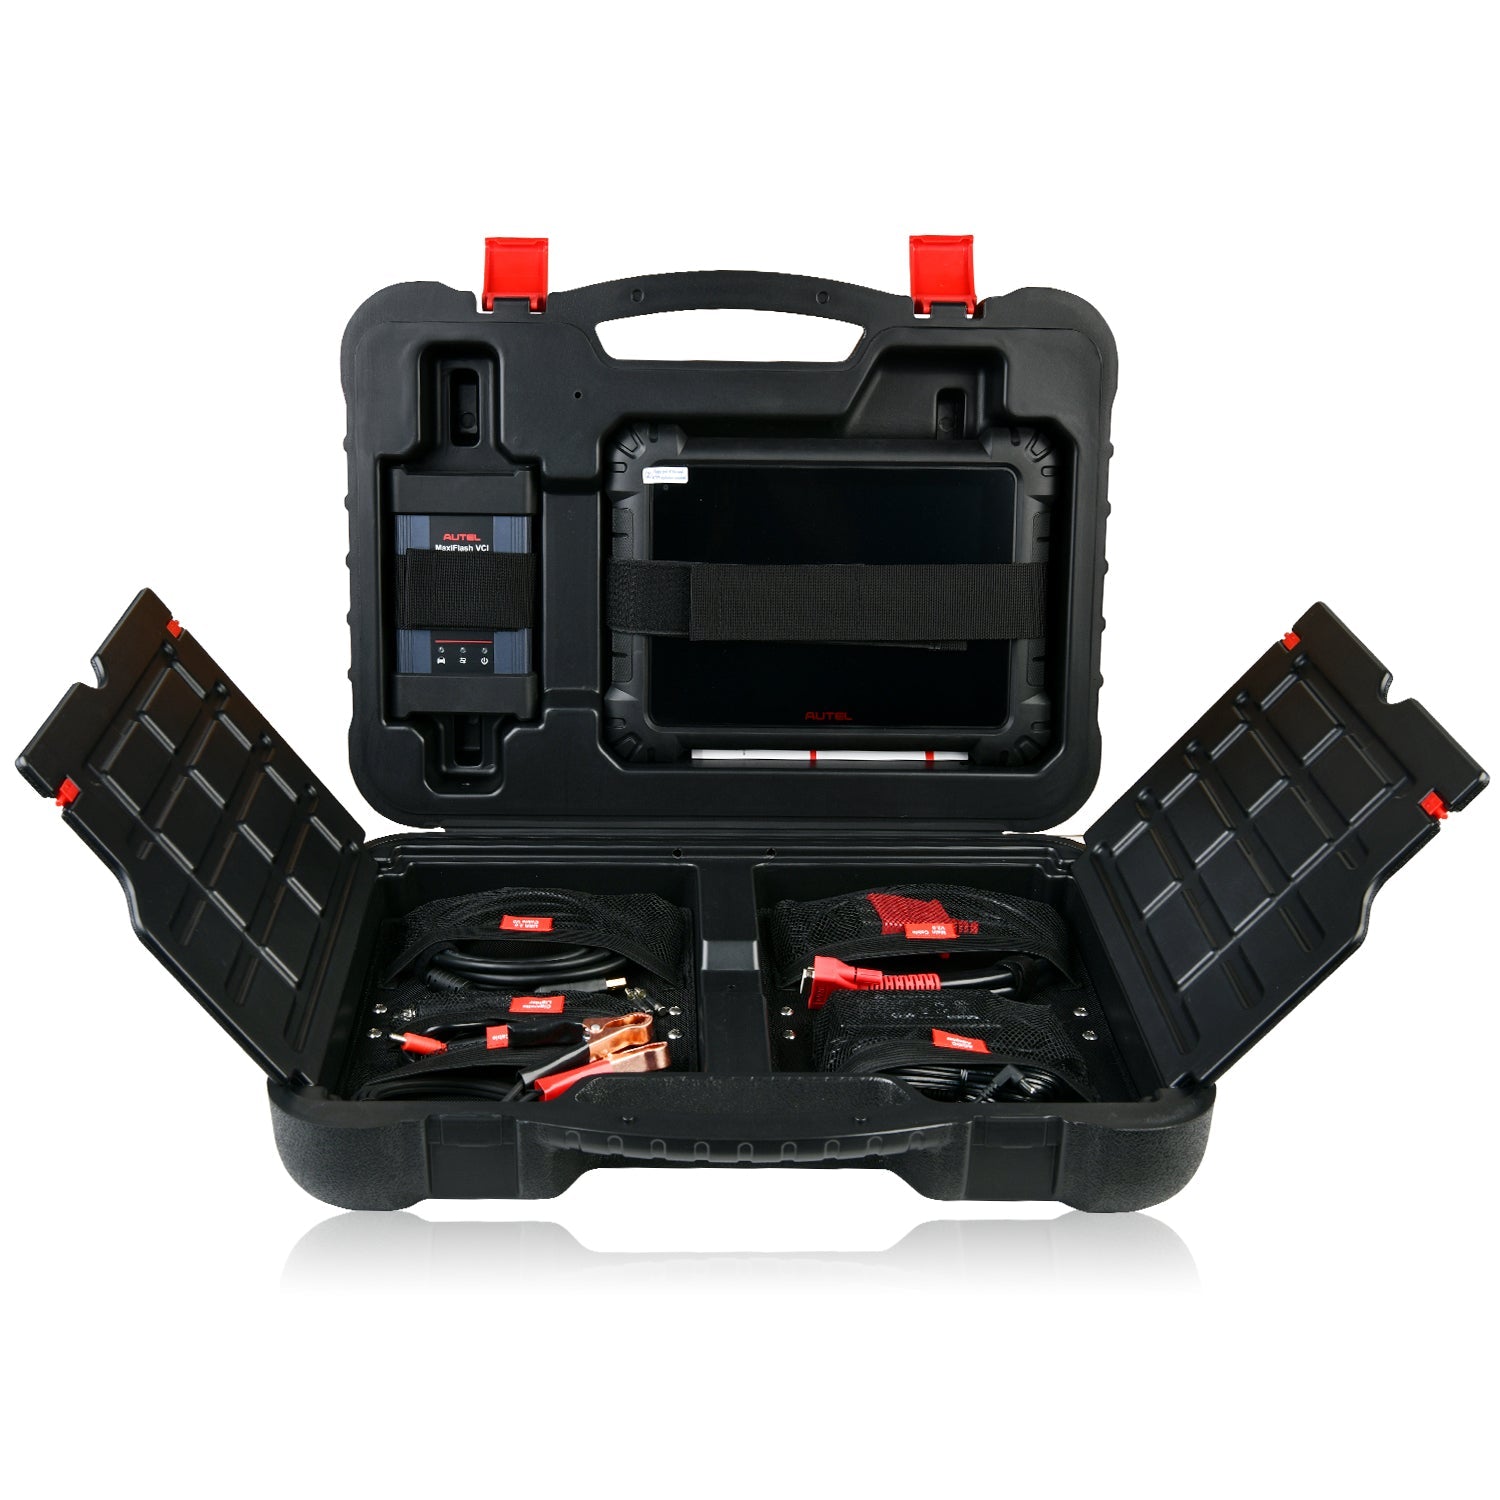 Autel Maxisys MS909 package carrying case